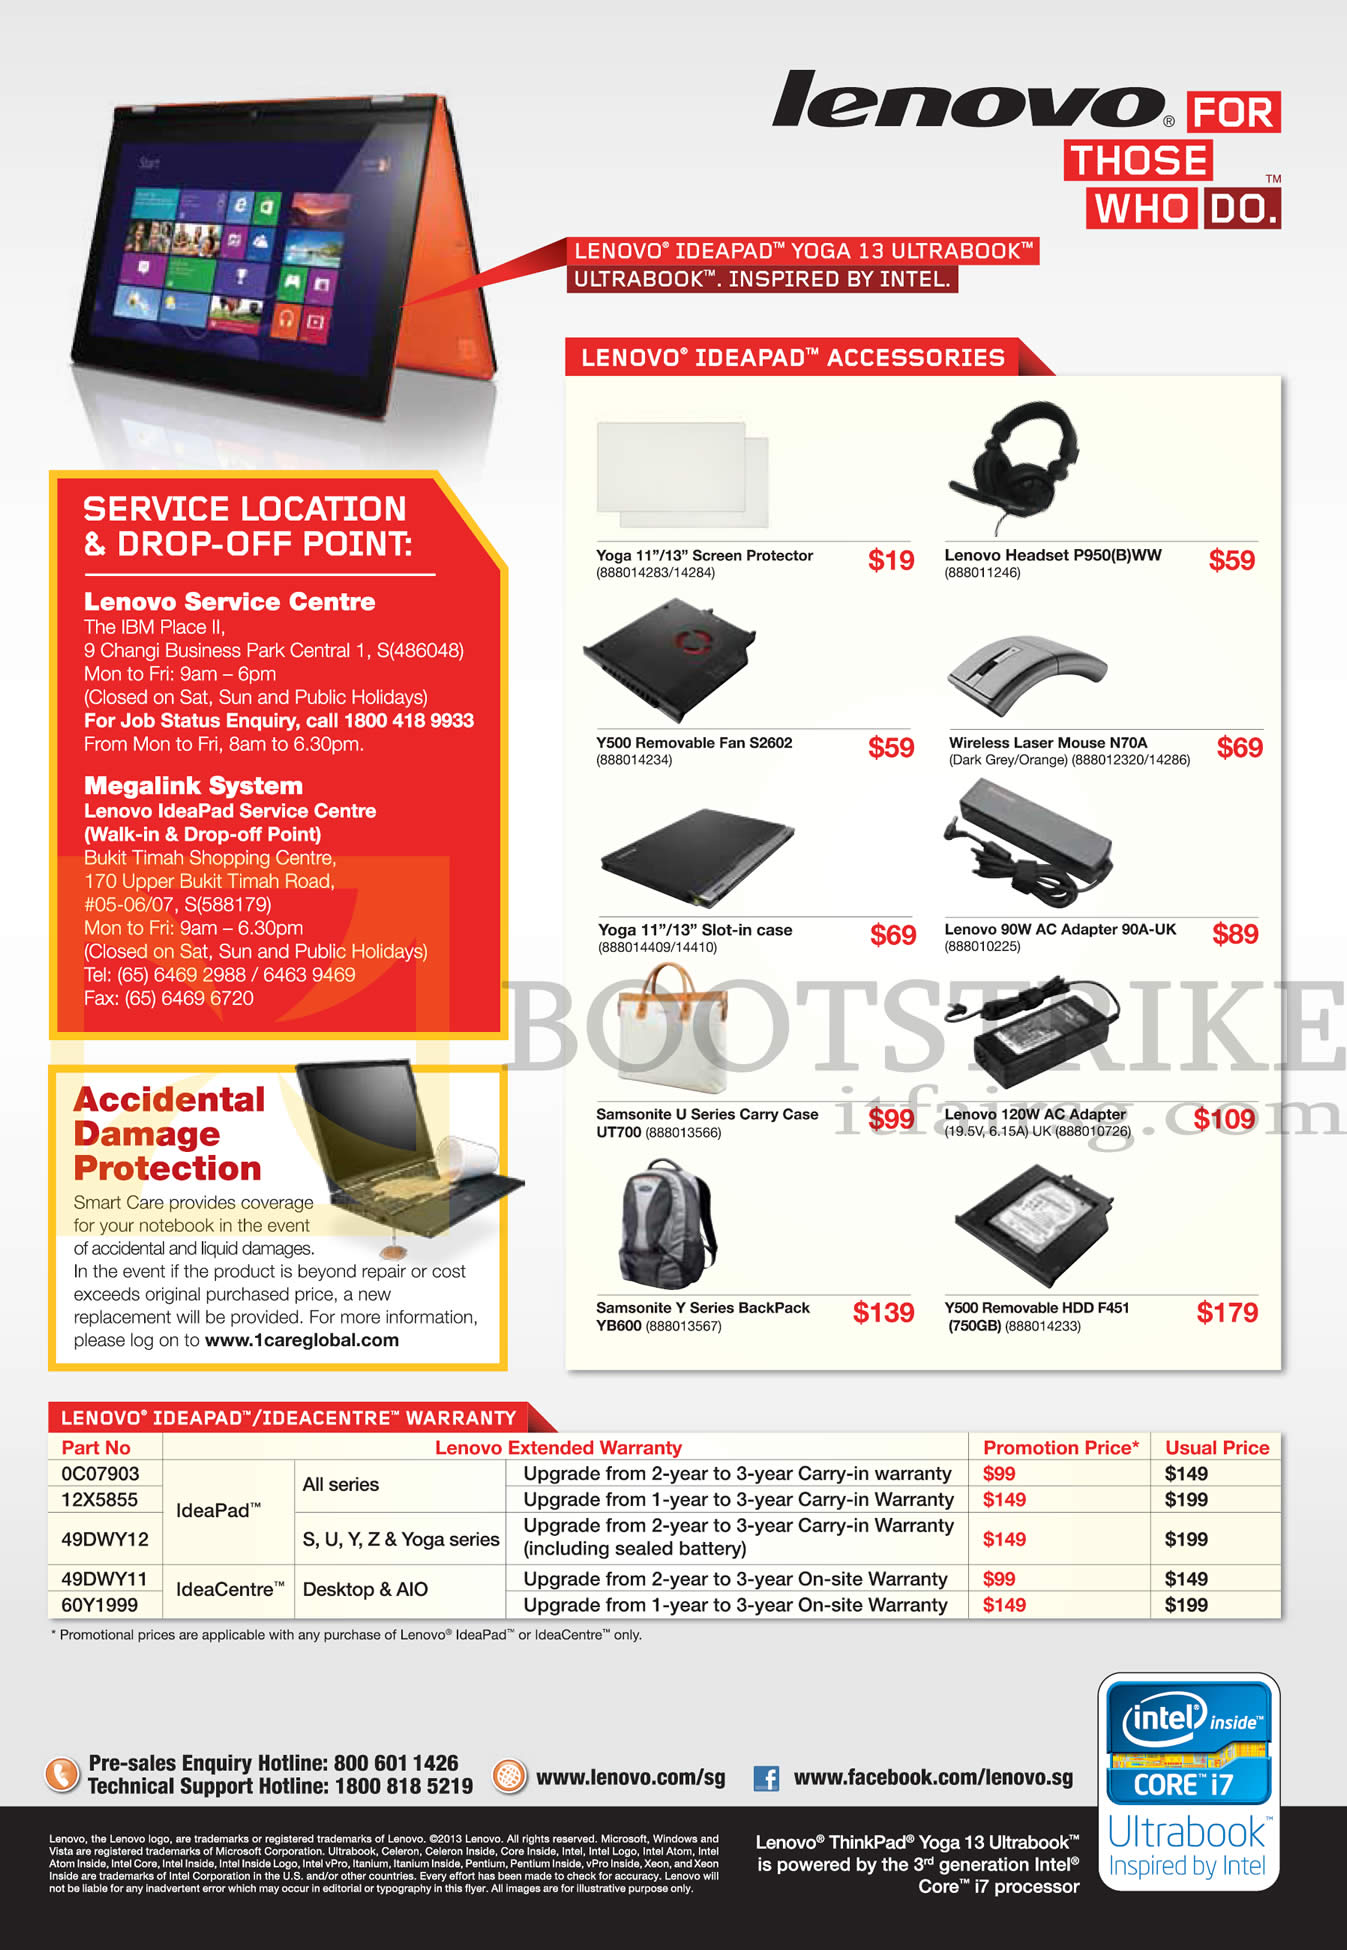 PC SHOW 2013 price list image brochure of Lenovo Accessories Ideapad Laser Mouse, AC Adapter, Removable HDD, Backpack, Fan, Service Centre